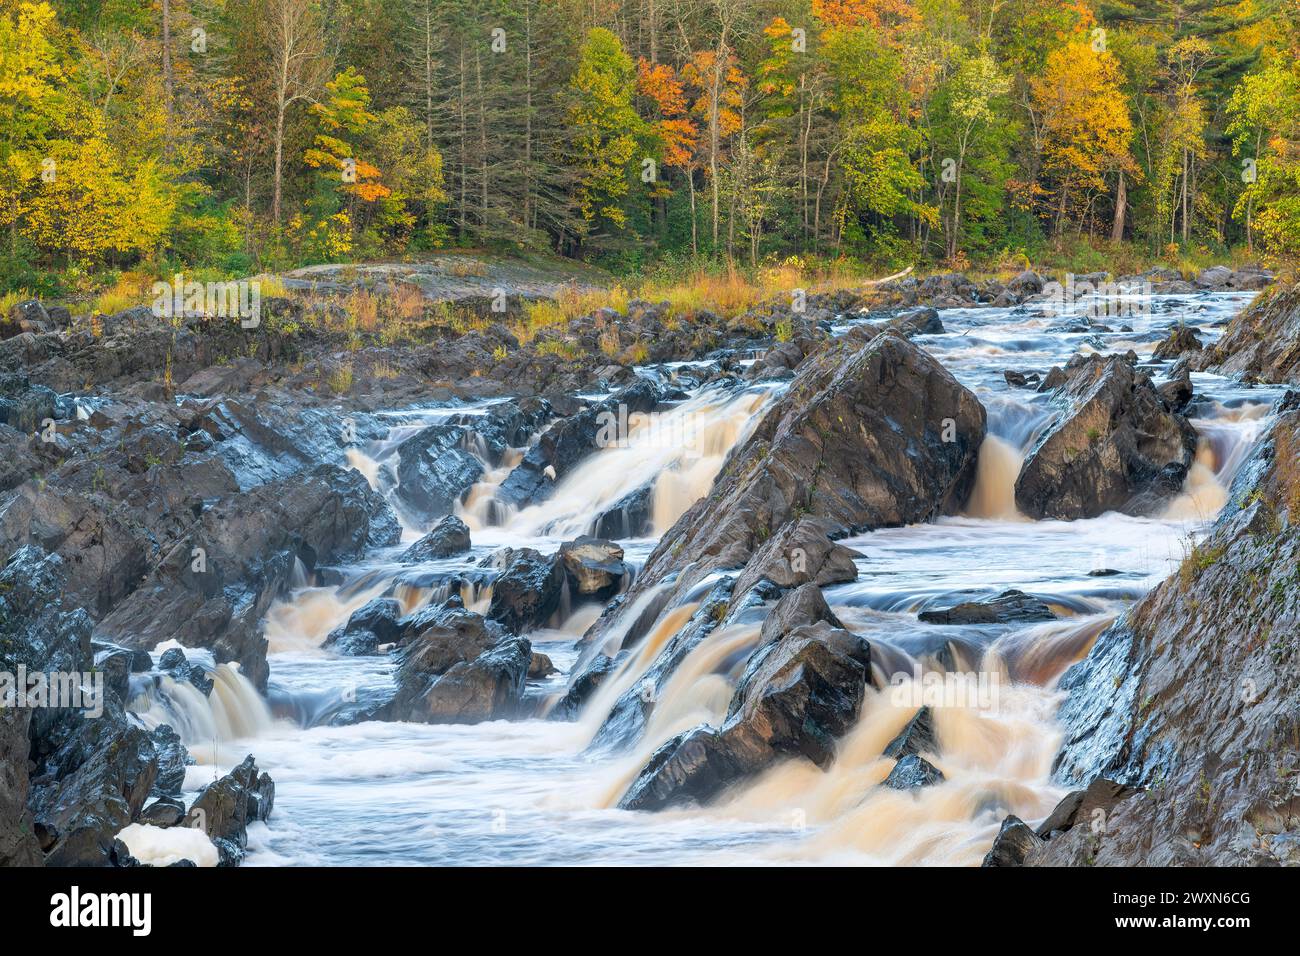 St. Louis River, Jay Cooke State Park, Herbst, MN, USA, von Dominique Braud/Dembinsky Photo Assoc Stockfoto